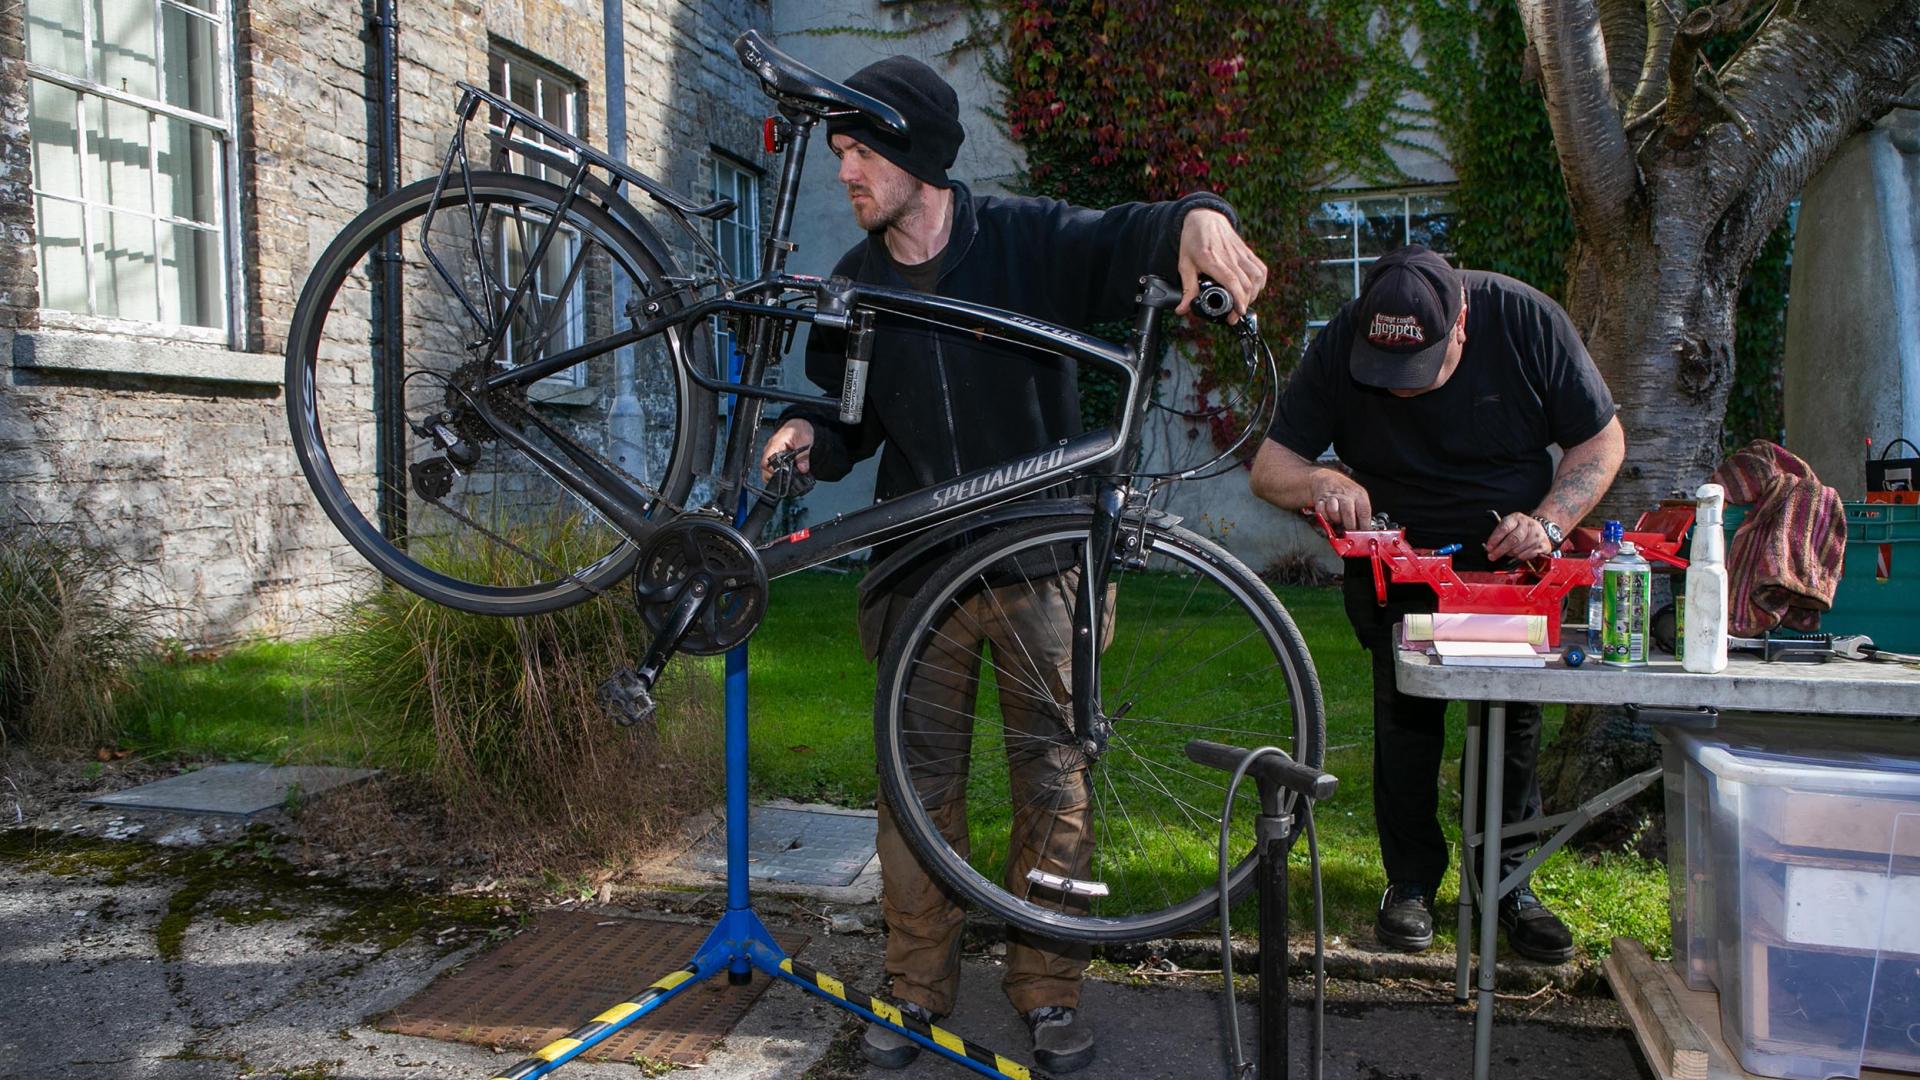 Shows the bike servicing clinic on DCU's Glasnevin campus